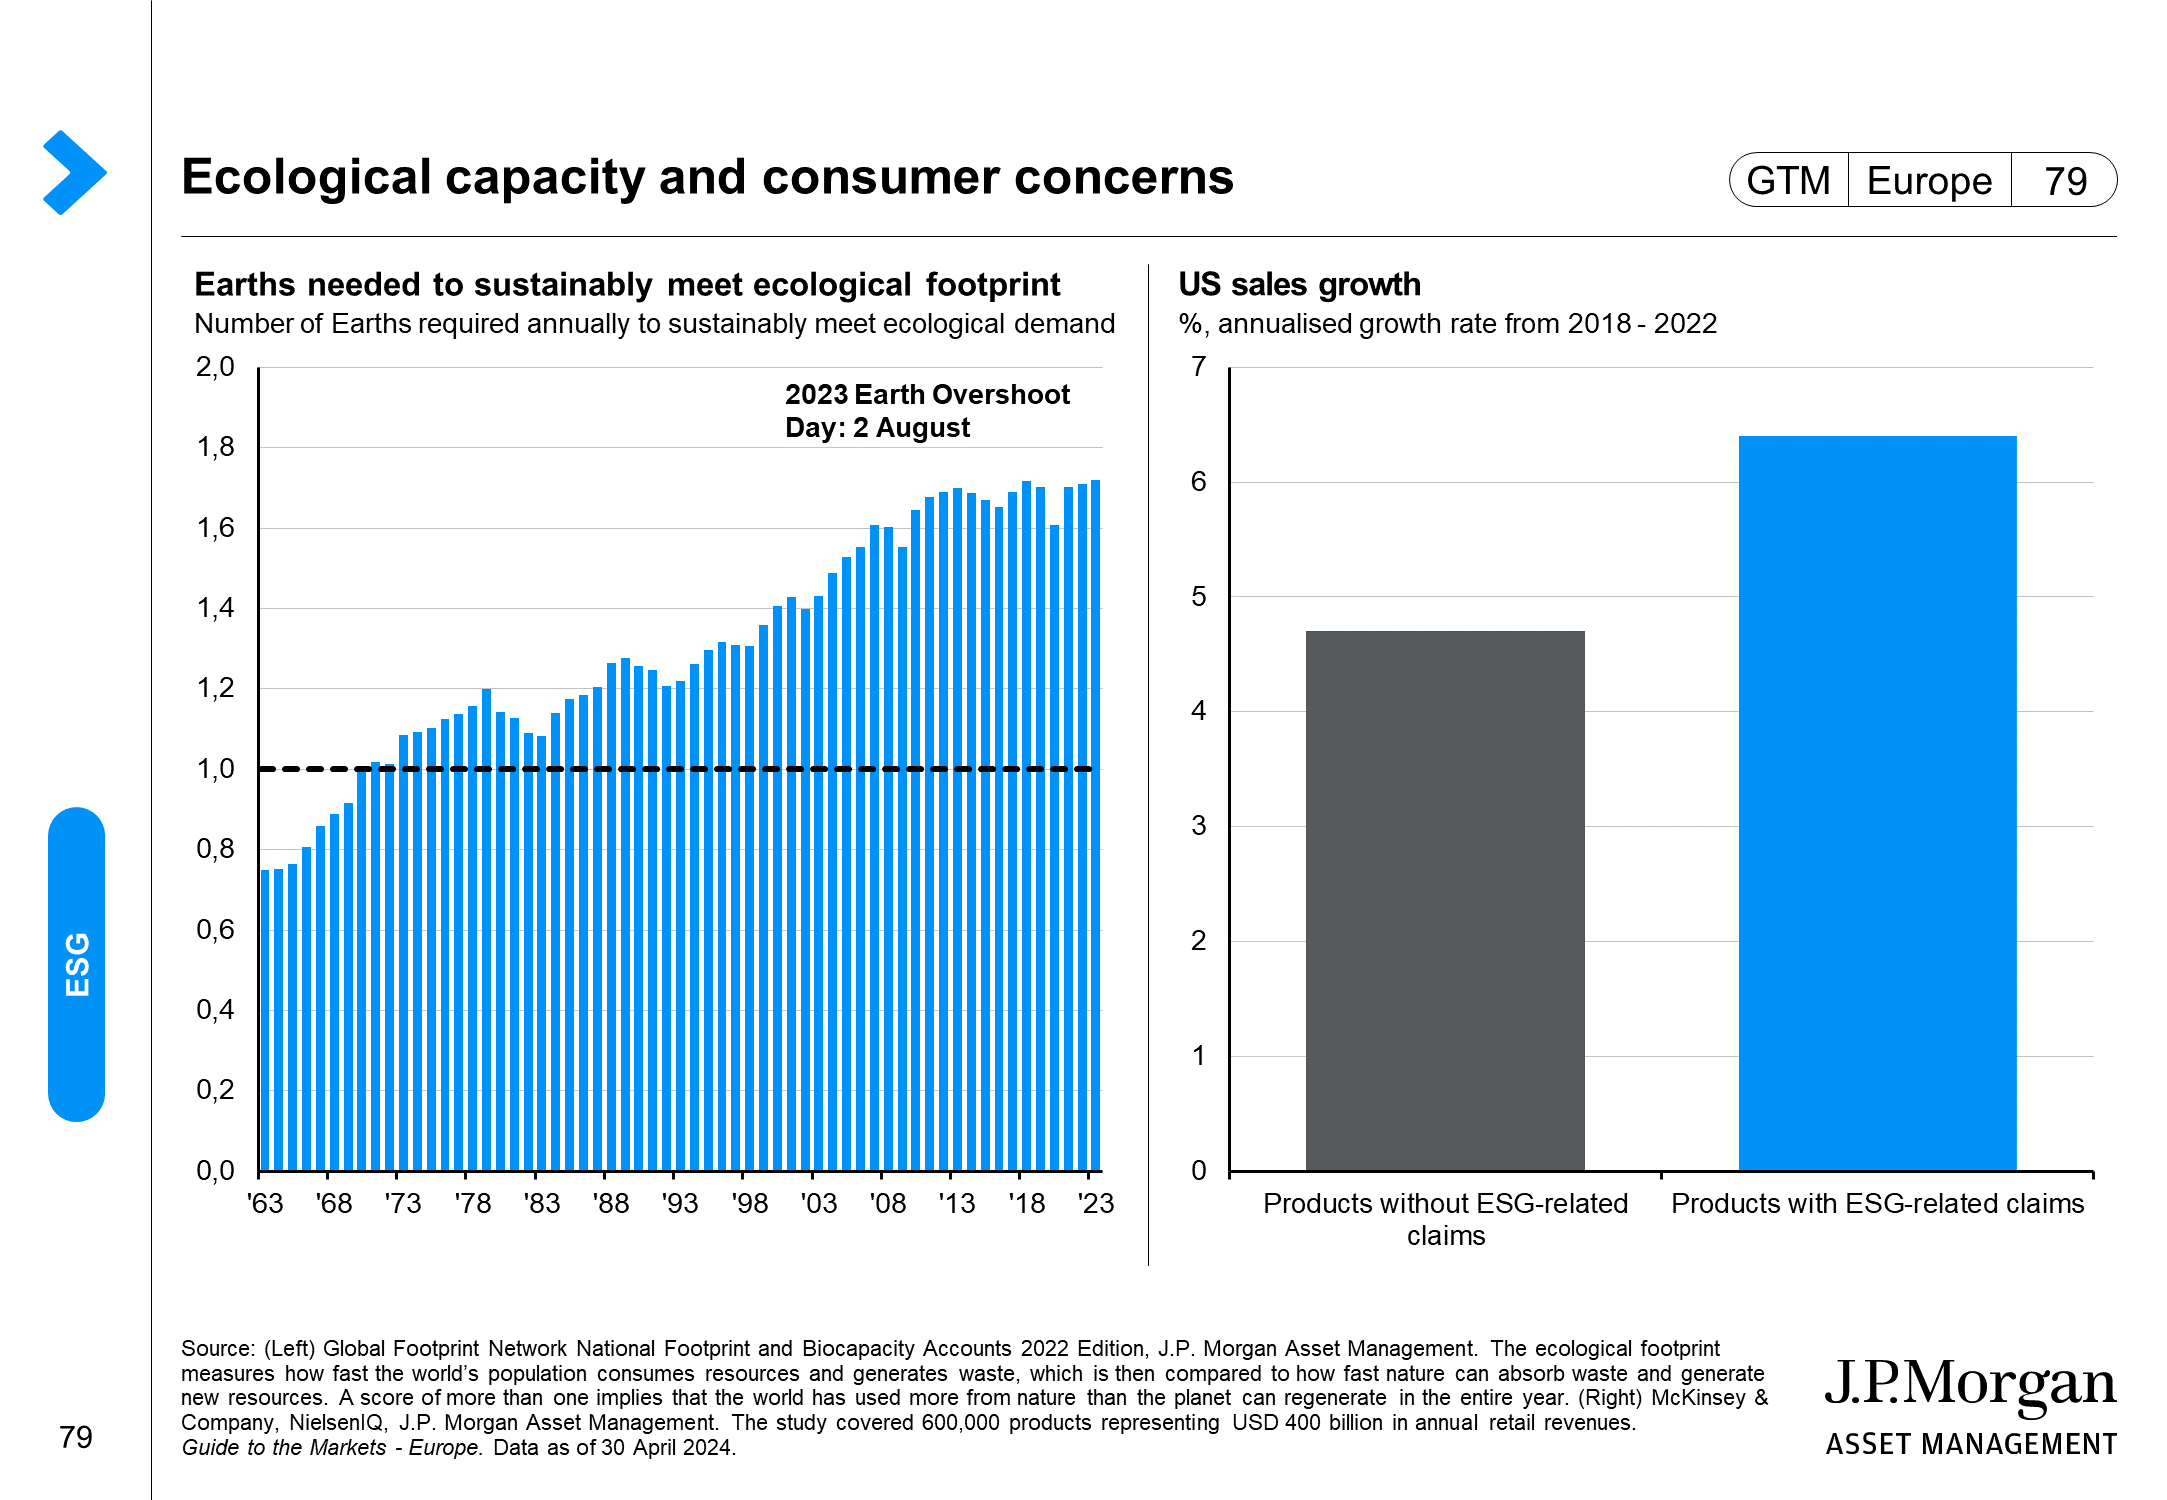 Emissions targets and consumer concerns